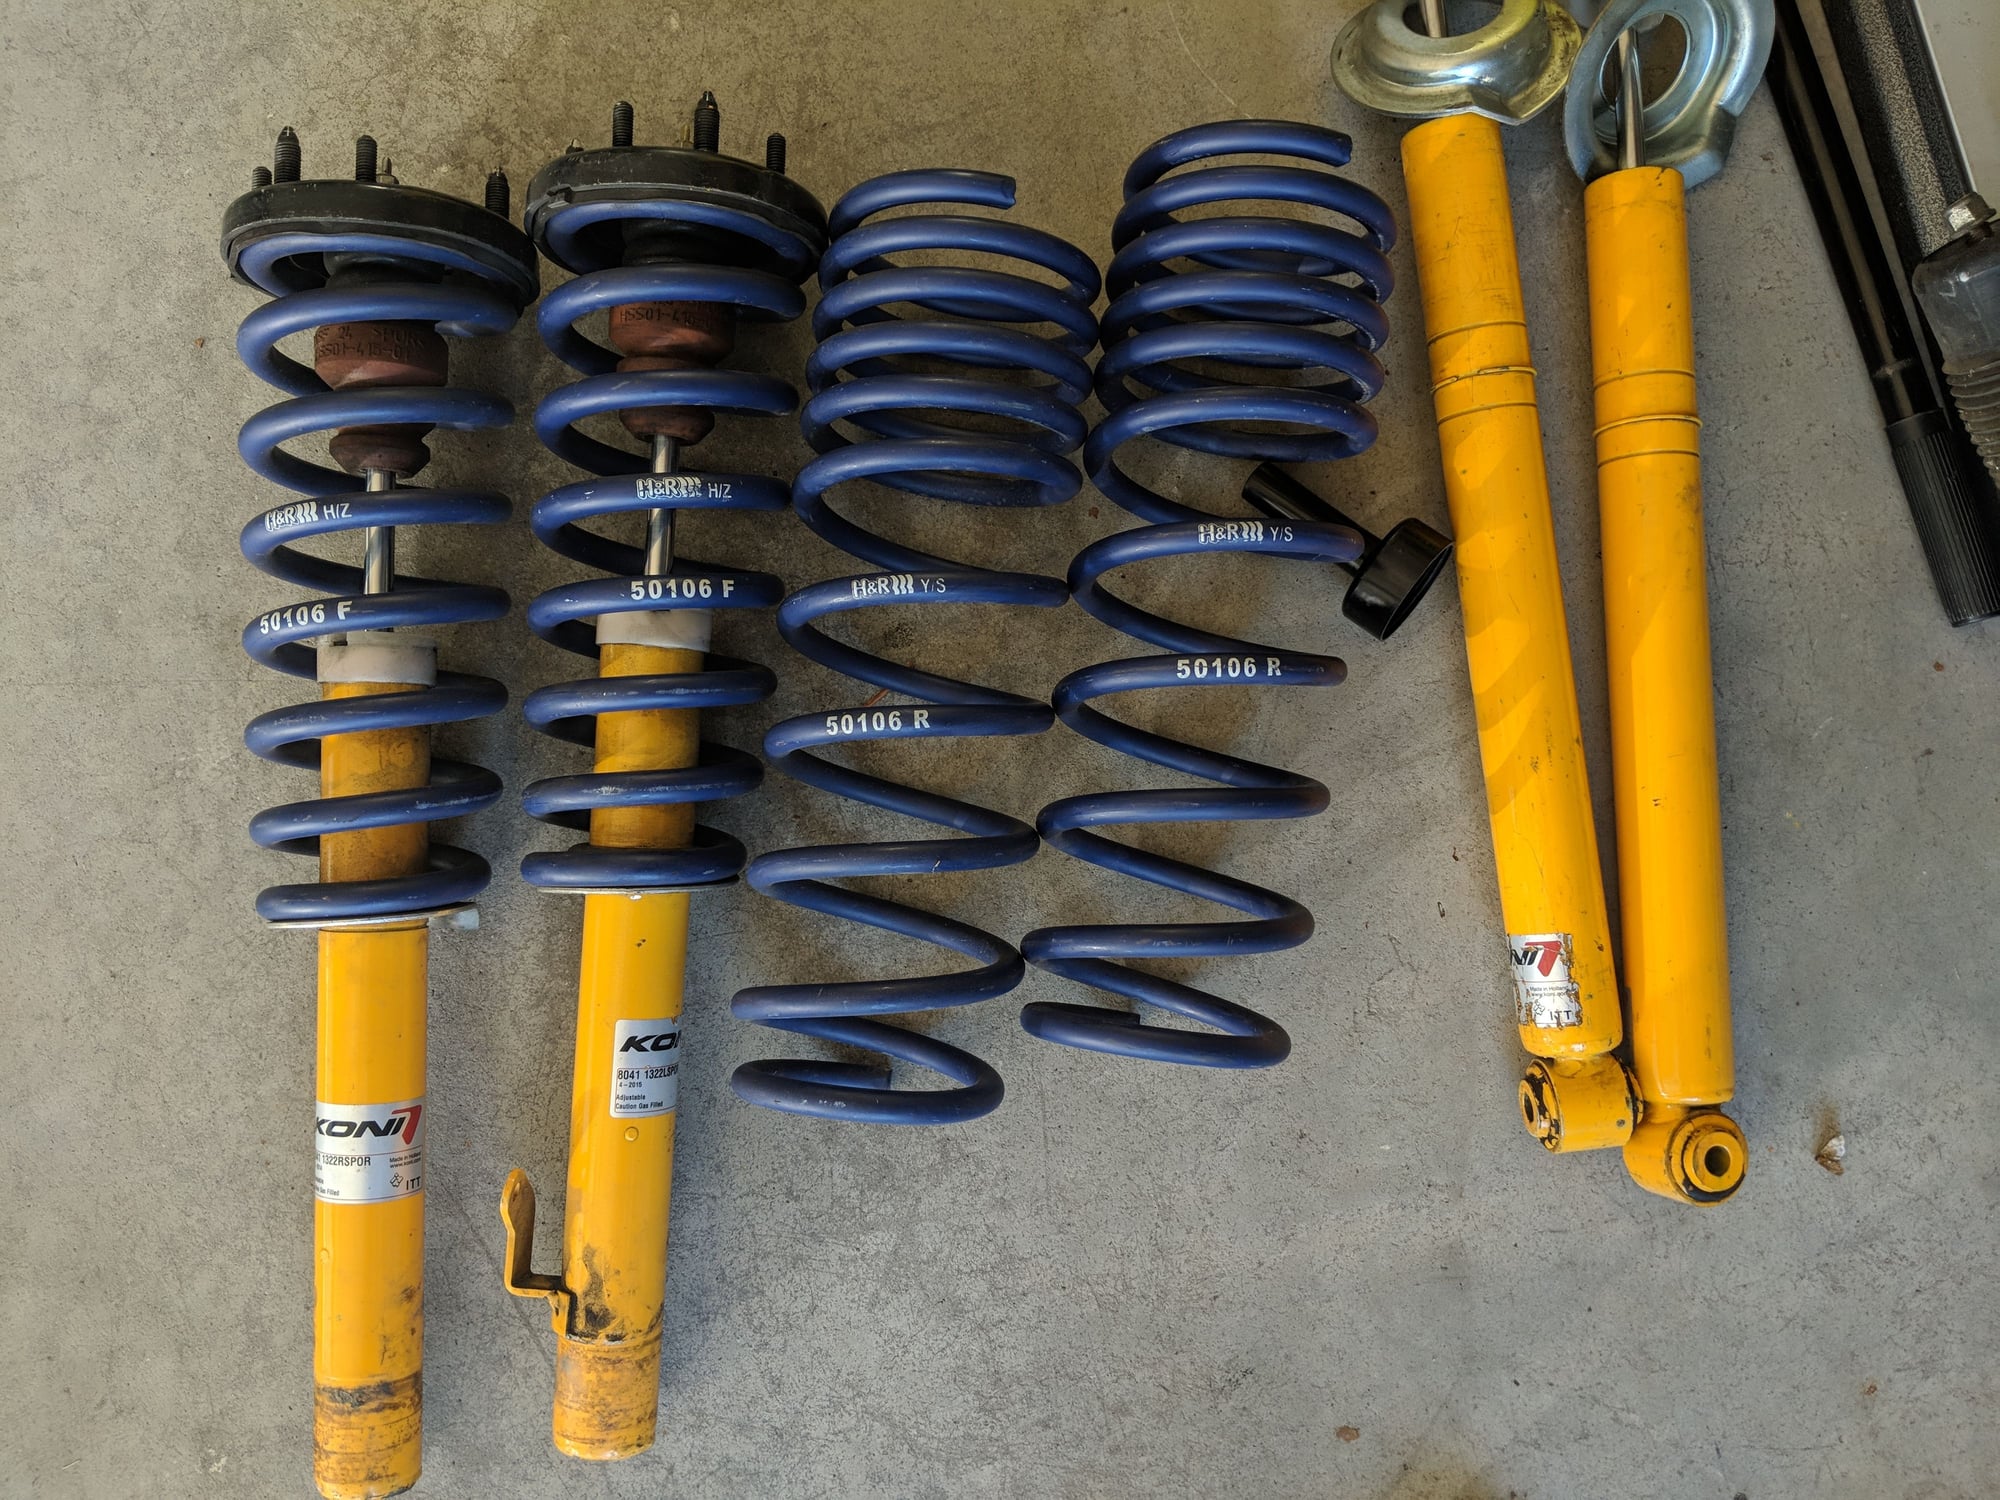 2008 Acura TL - H&R Sport Springs (TL-S Spring Rates 50106) with Koni Yellow Shocks (adjustable rebound) - Steering/Suspension - $350 - San Diego, CA 92128, United States